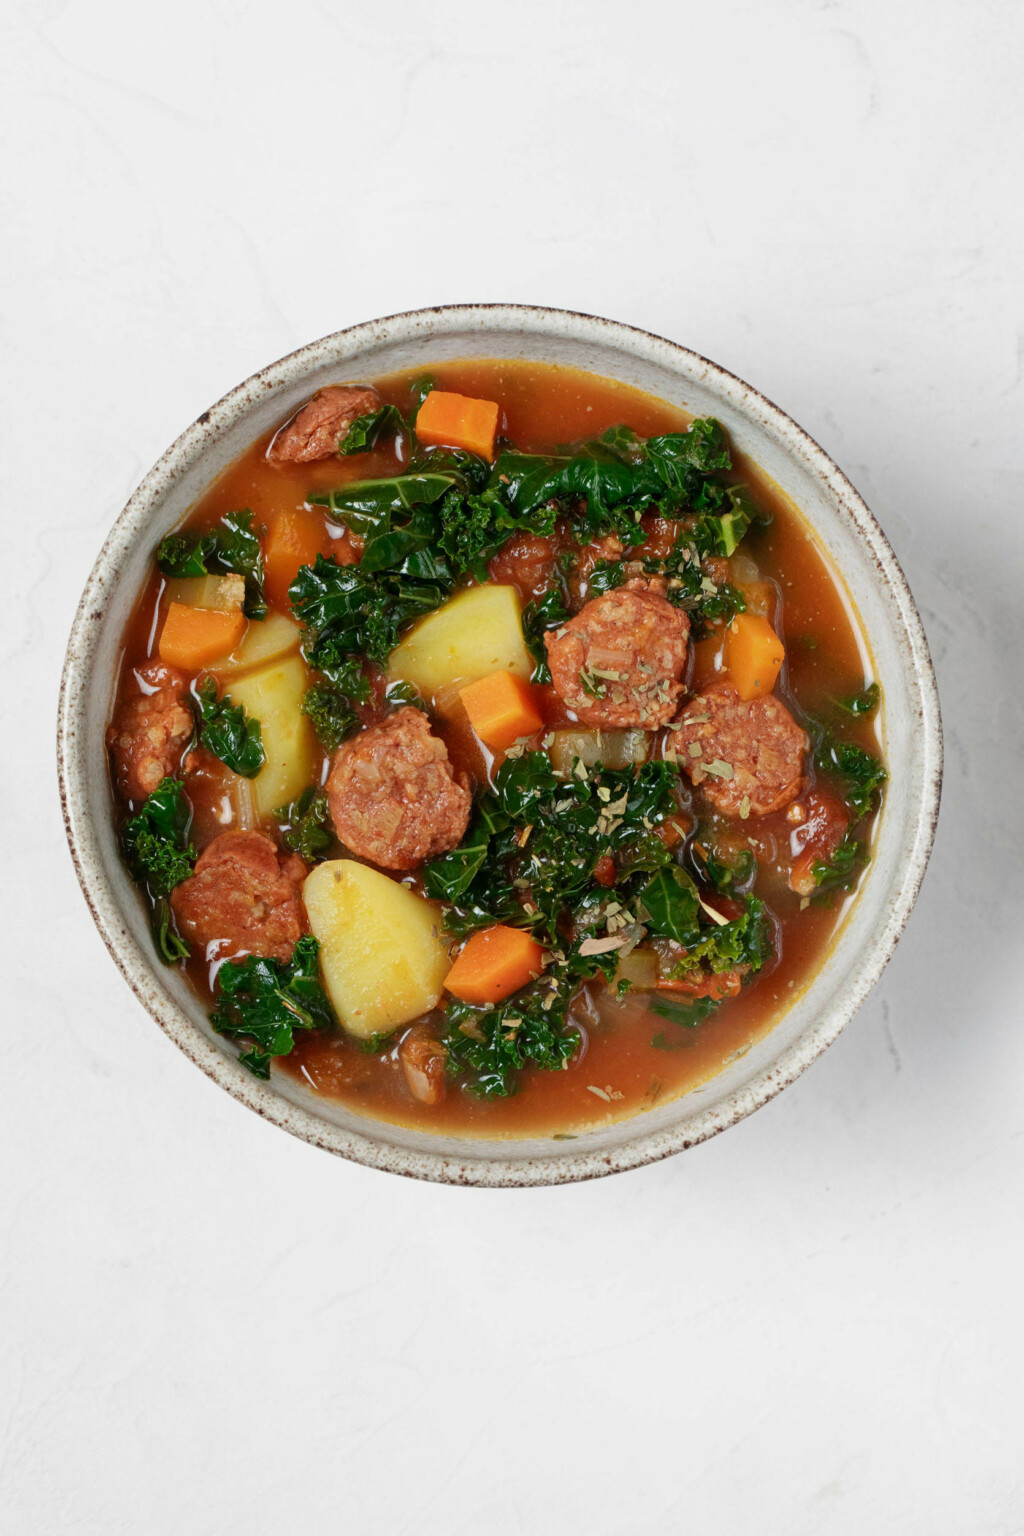 A gray ceramic round bowl has been filled with a hearty plant-based soup. The soup is chock full of kale, potatoes, and vegan sausage slices.